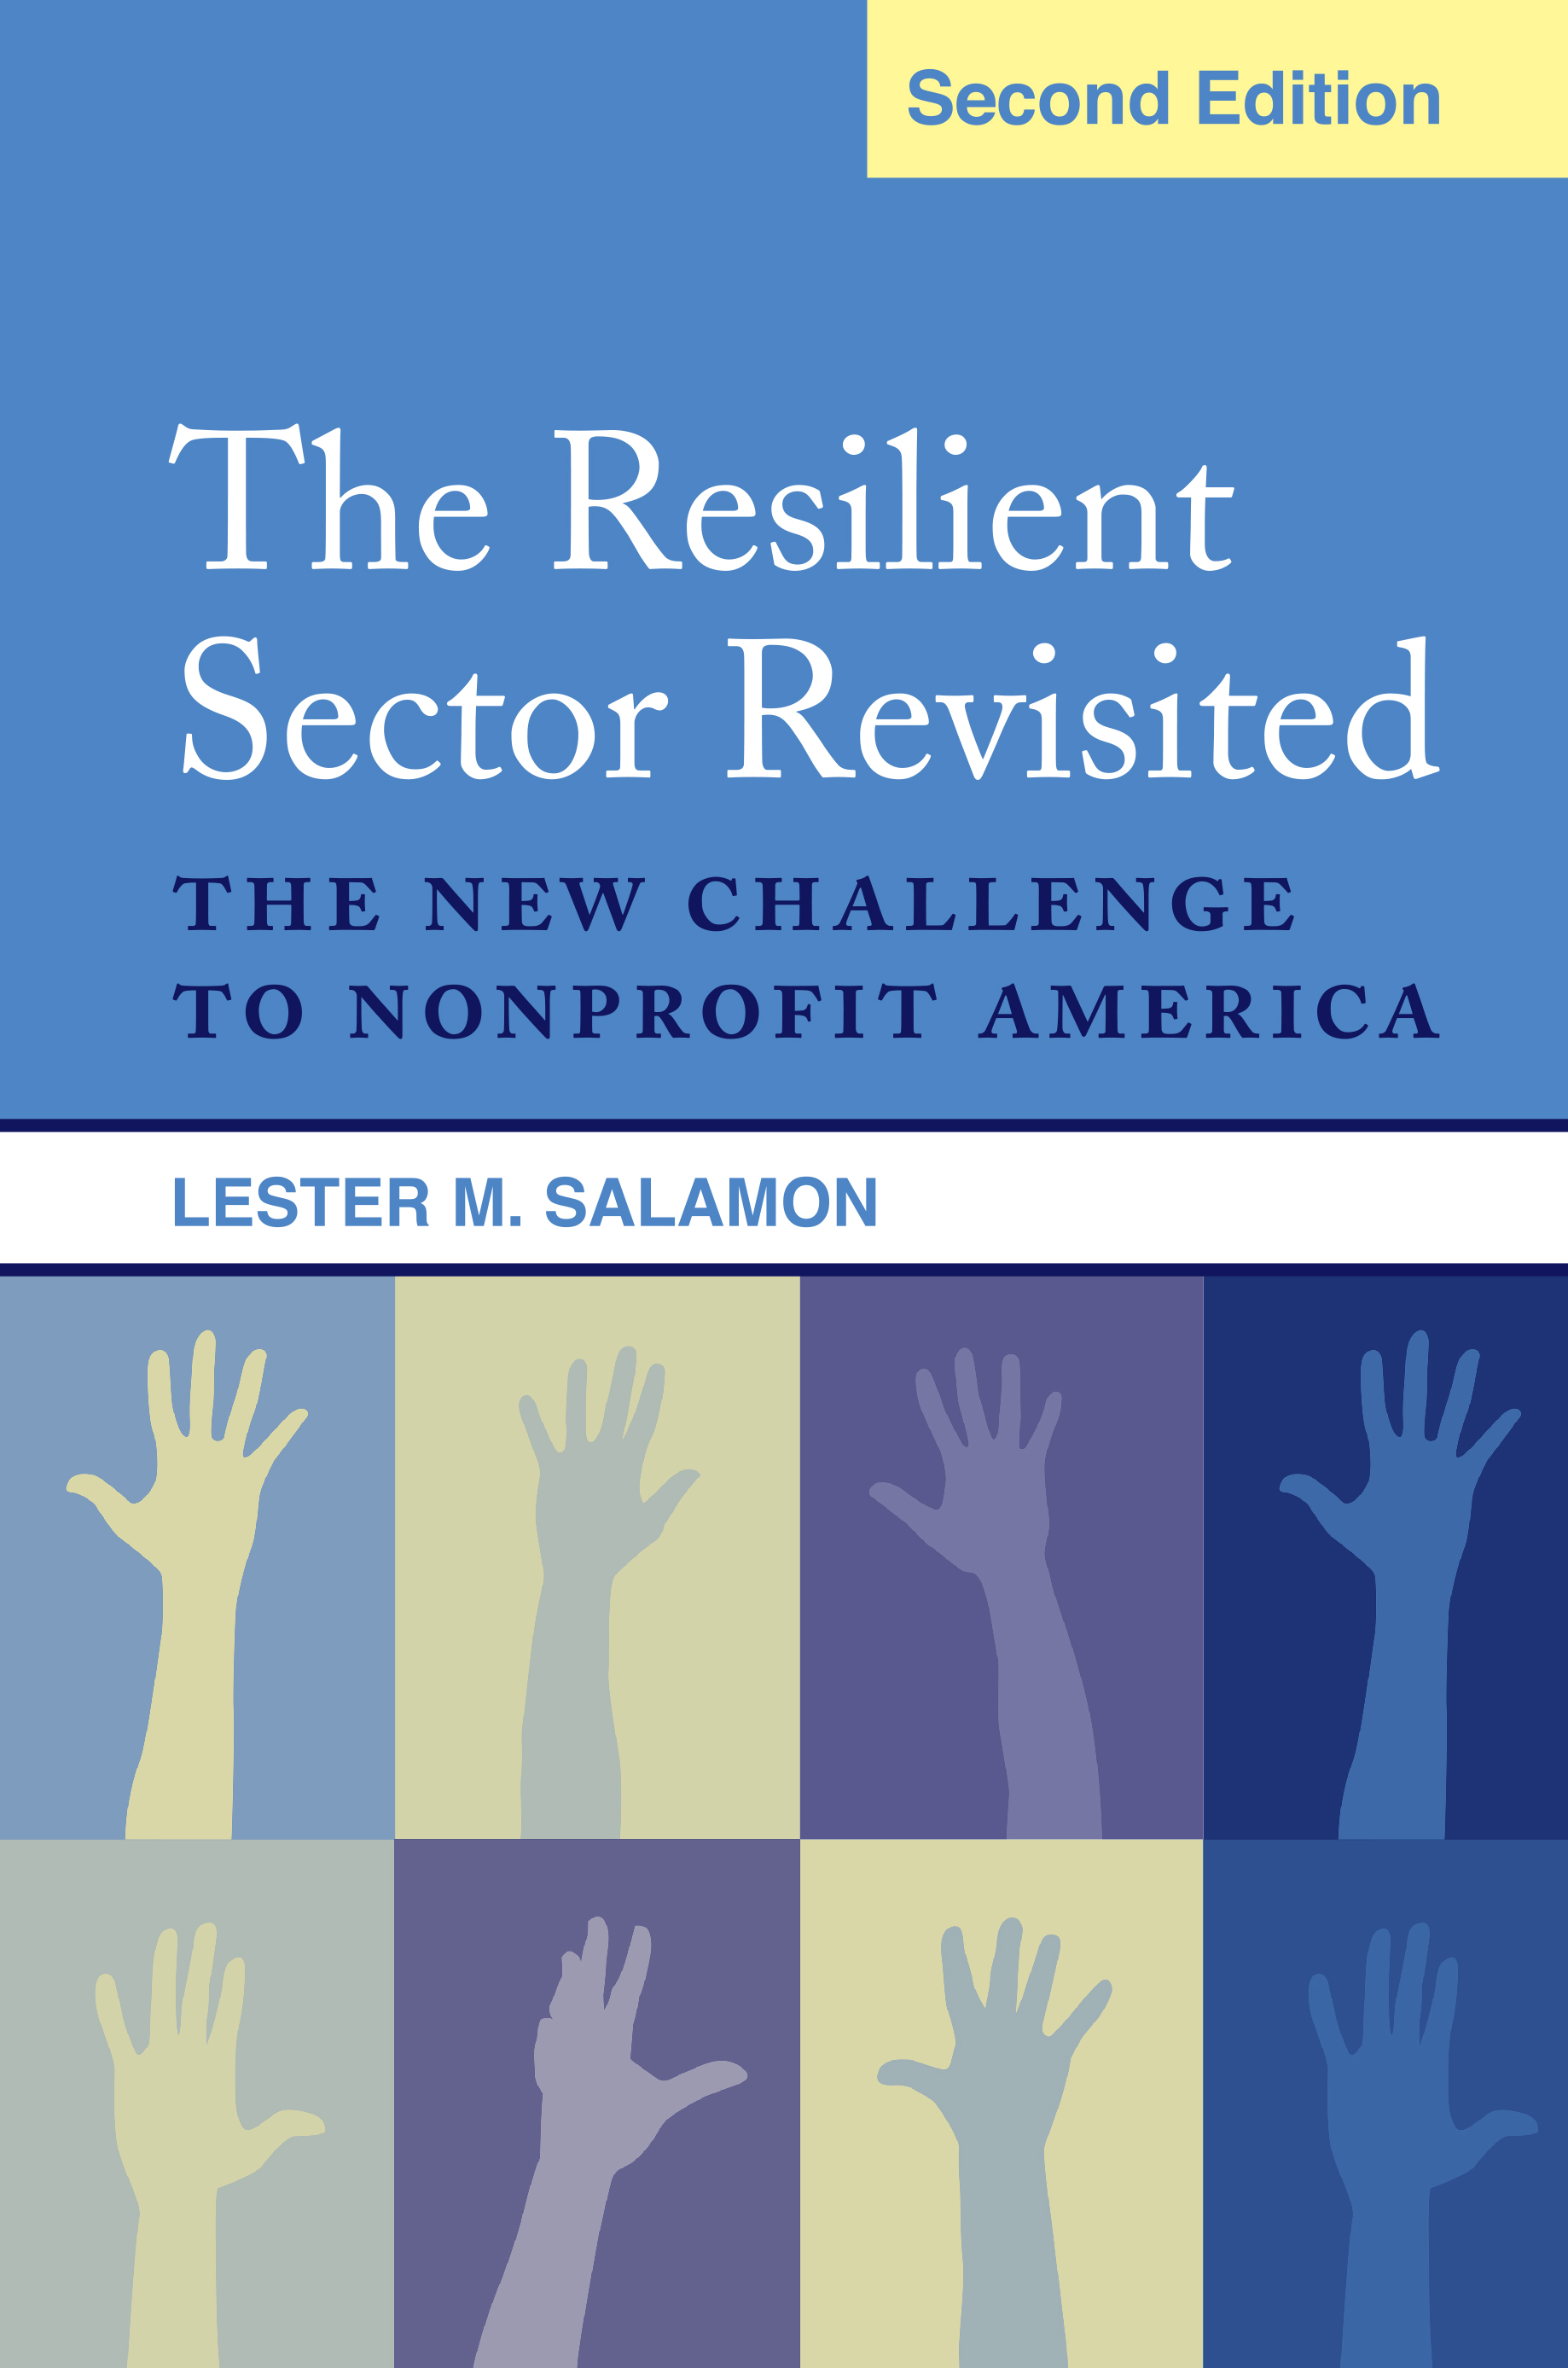 The Resilient Sector Revisited